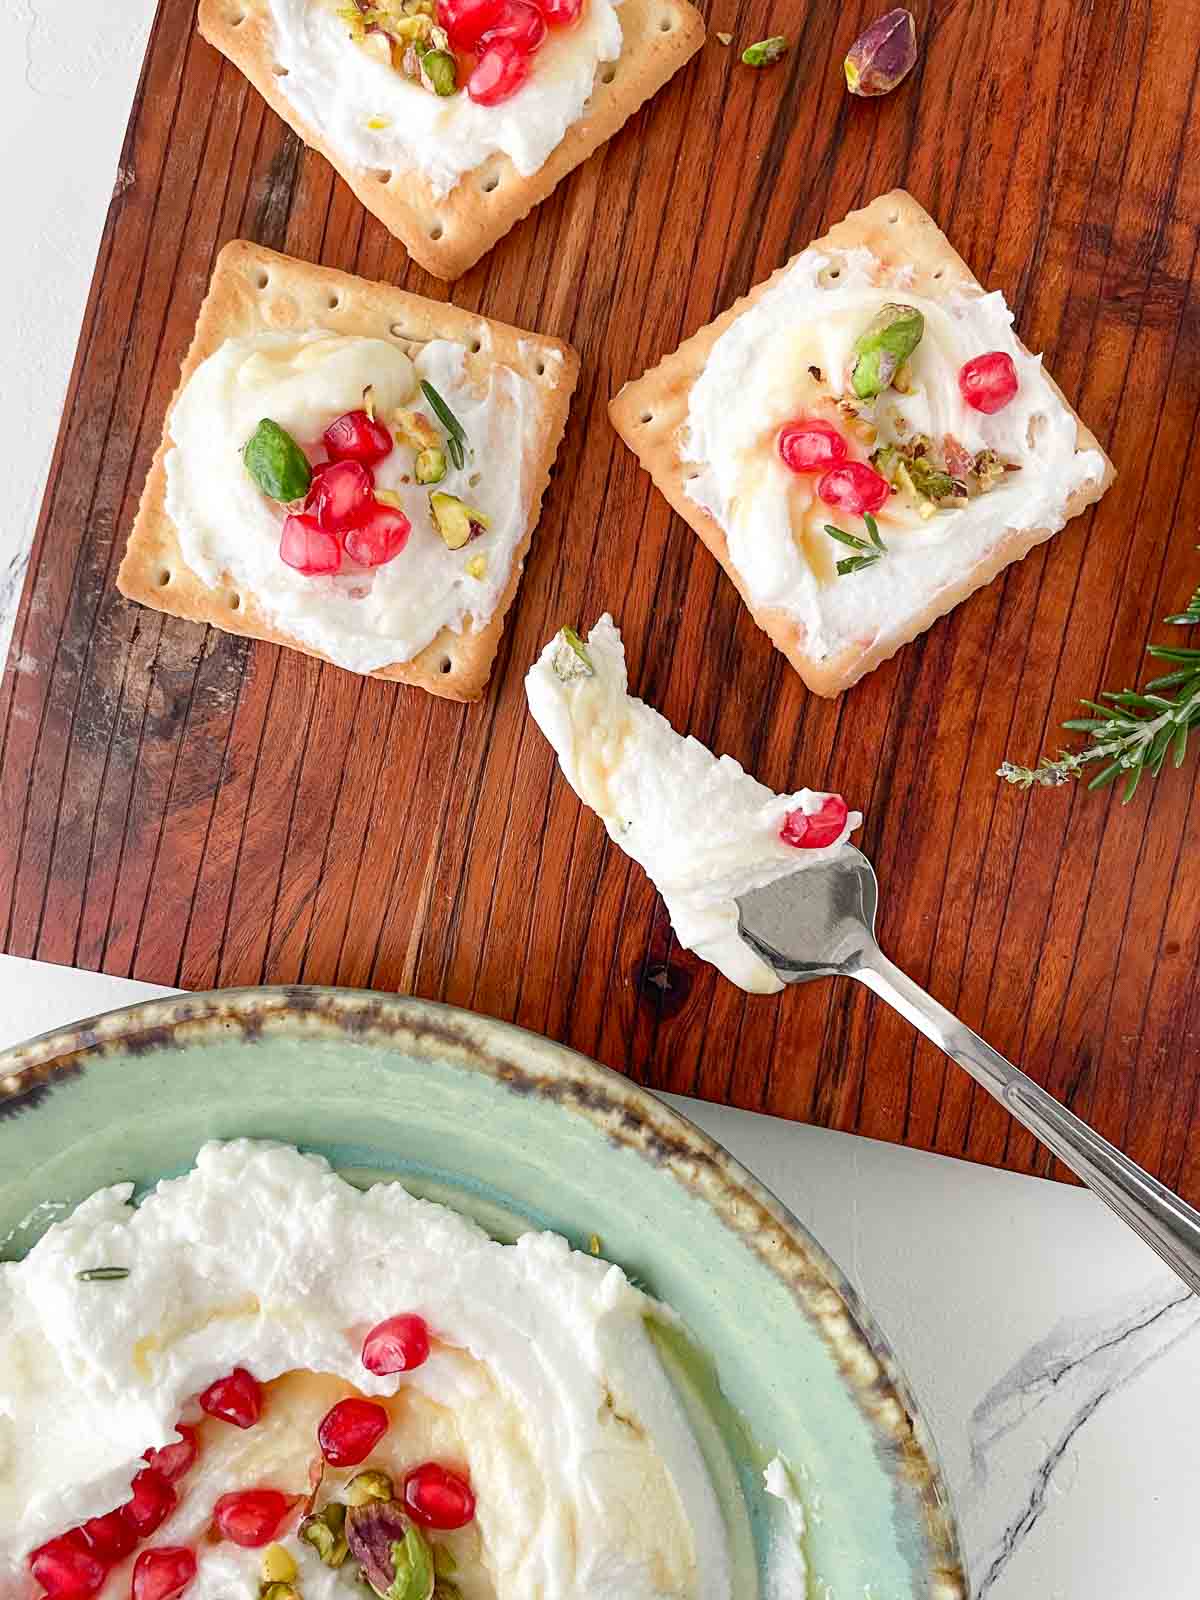 Whipped goat cheese dip spread on crackers